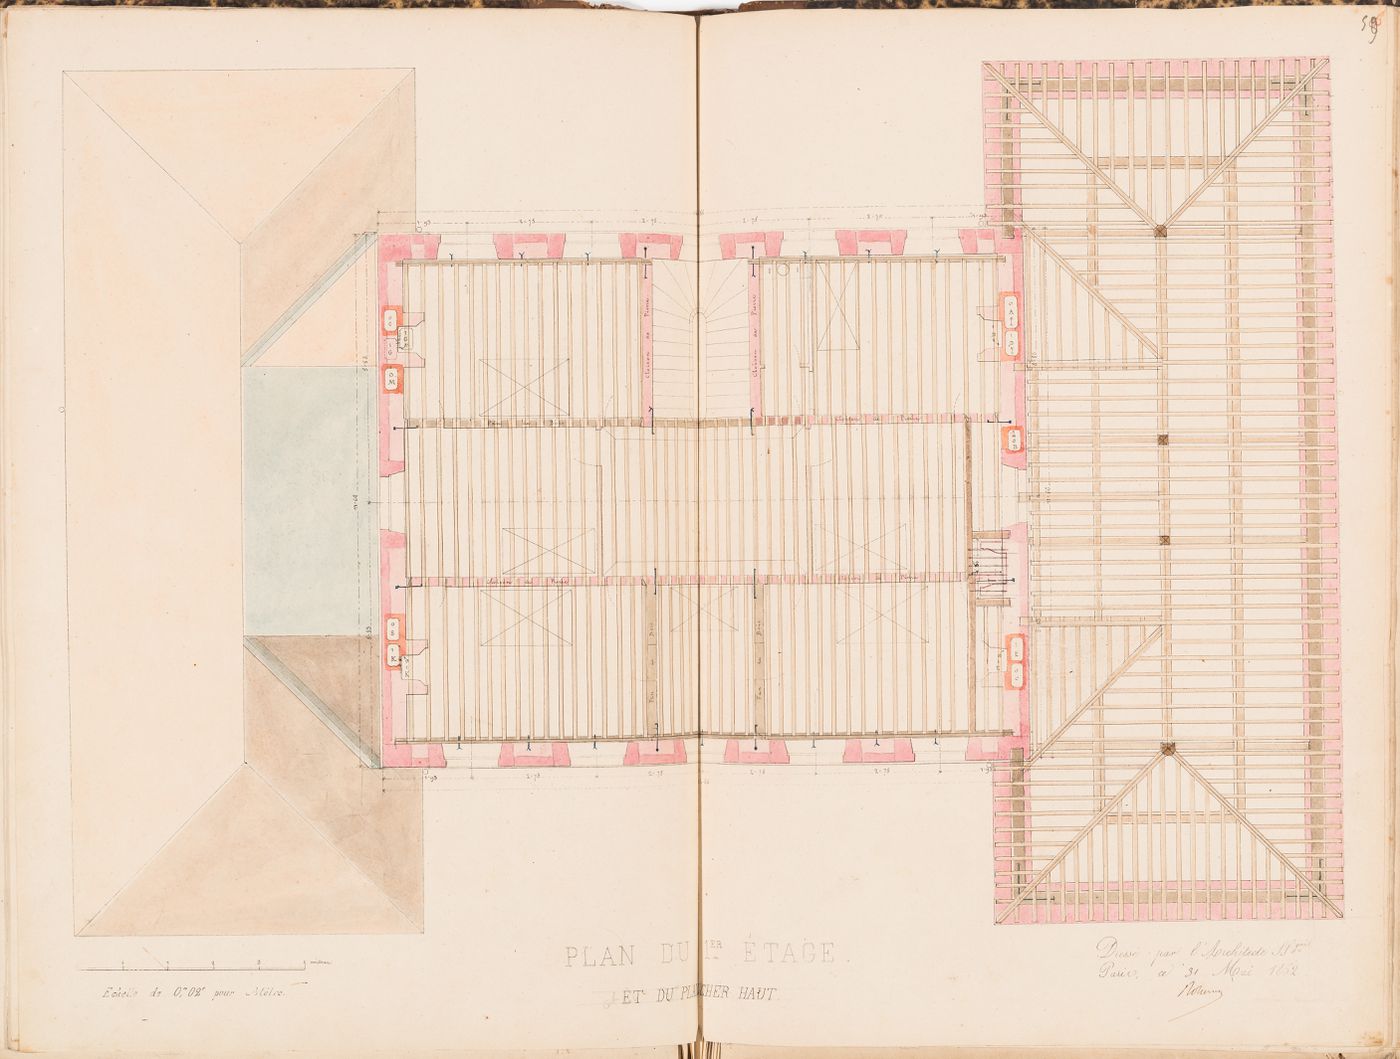 First floor plan with a partial roof plan, including the roof and floor plan framing, for a country house for Madame de Lescure, Royan